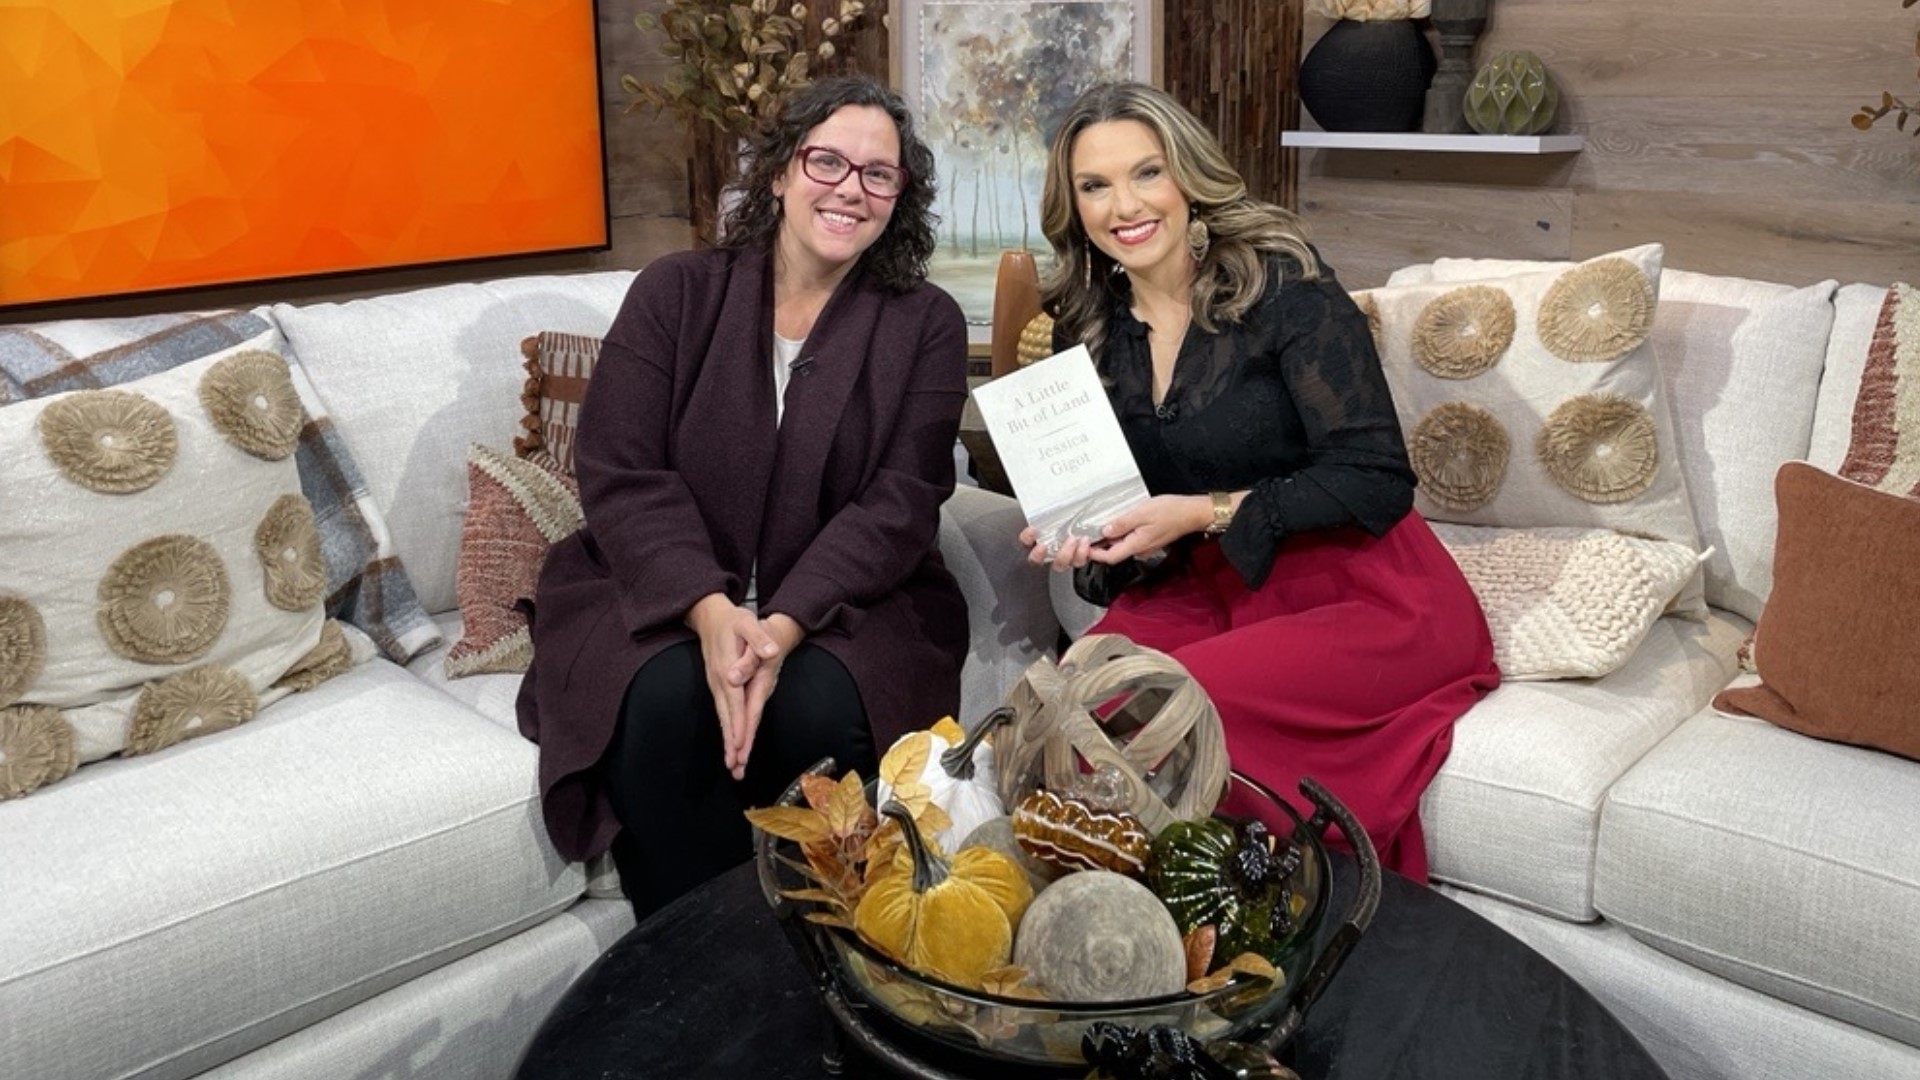 Jessica Gigot, author of the new book "A Little Bit of Land," joined Amity to discuss farming. #newdaynw